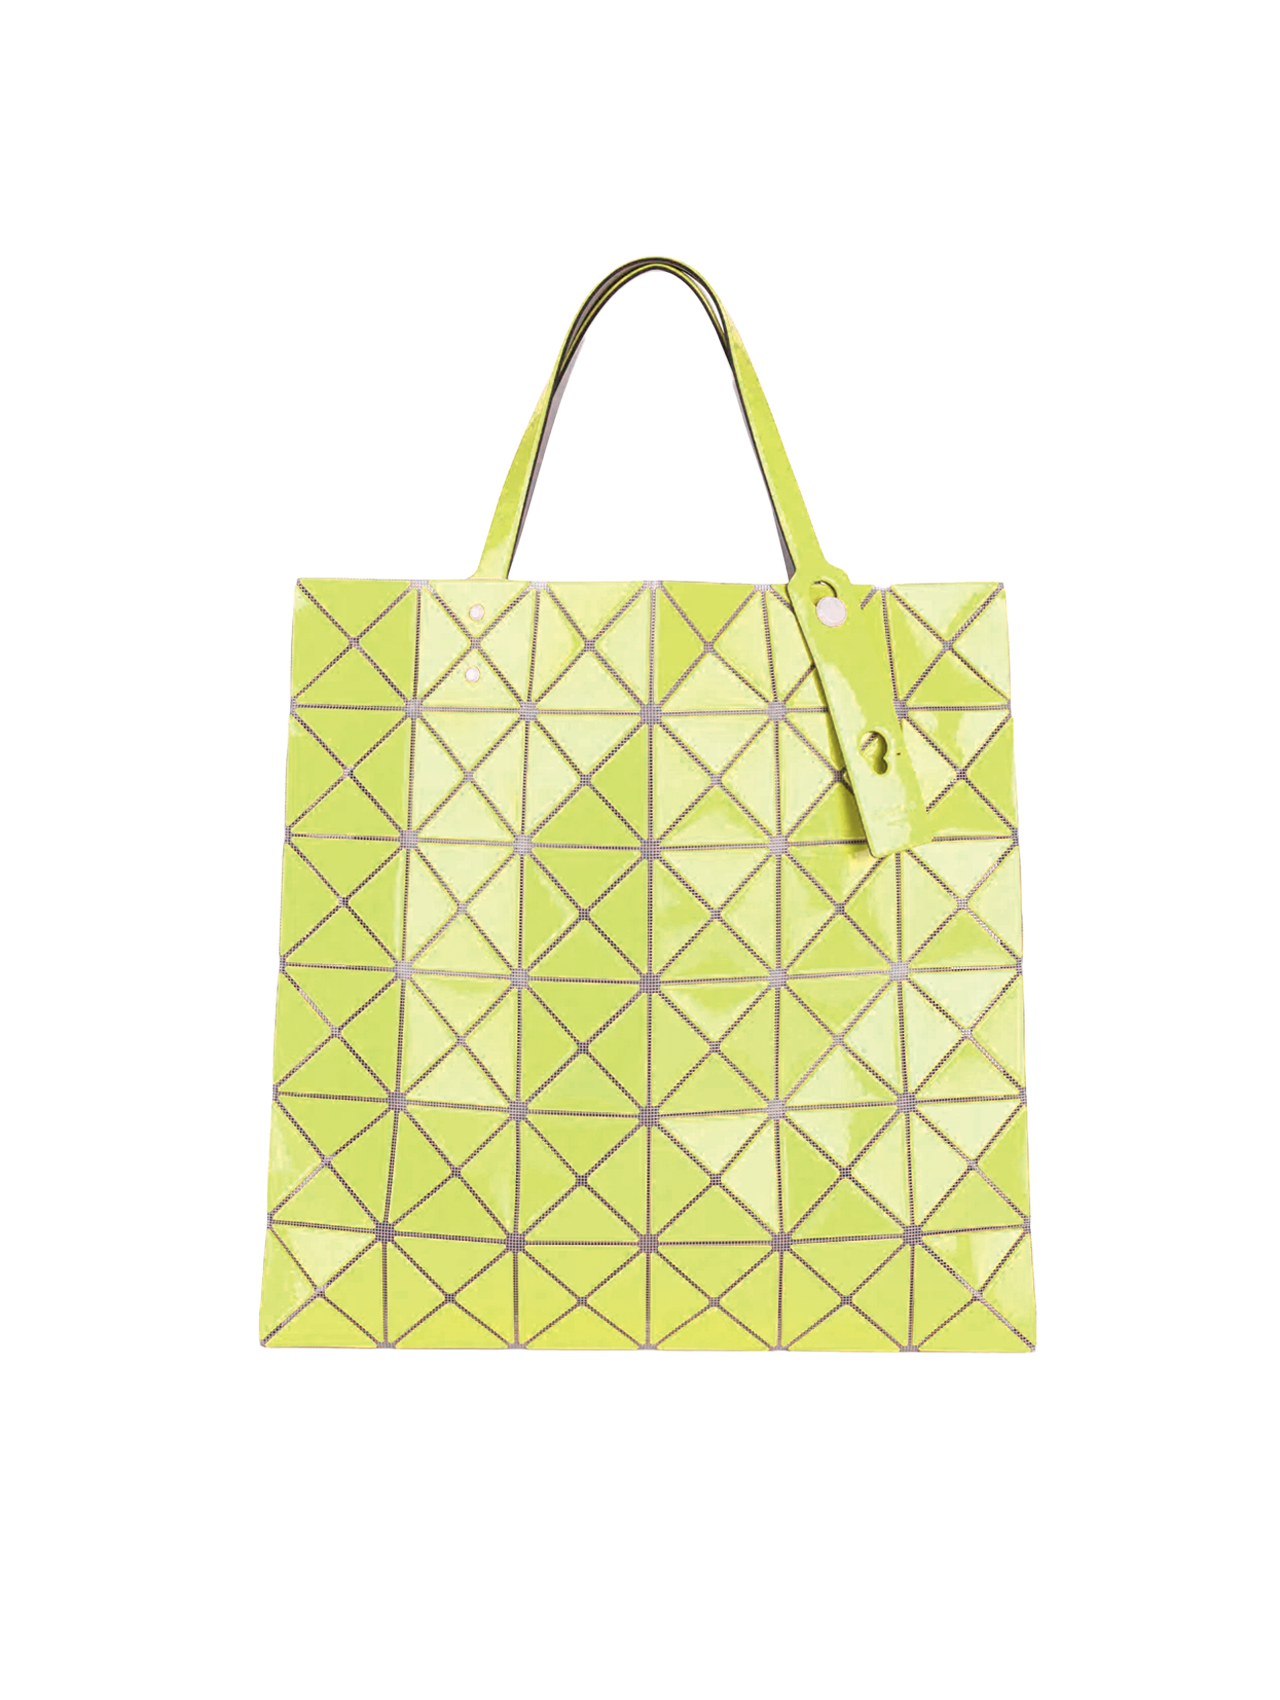 100% AUTHENTIC BAO BAO ISSEY MIYAKE LUCENT BEIGE COLOR TOTE BAG | eBay